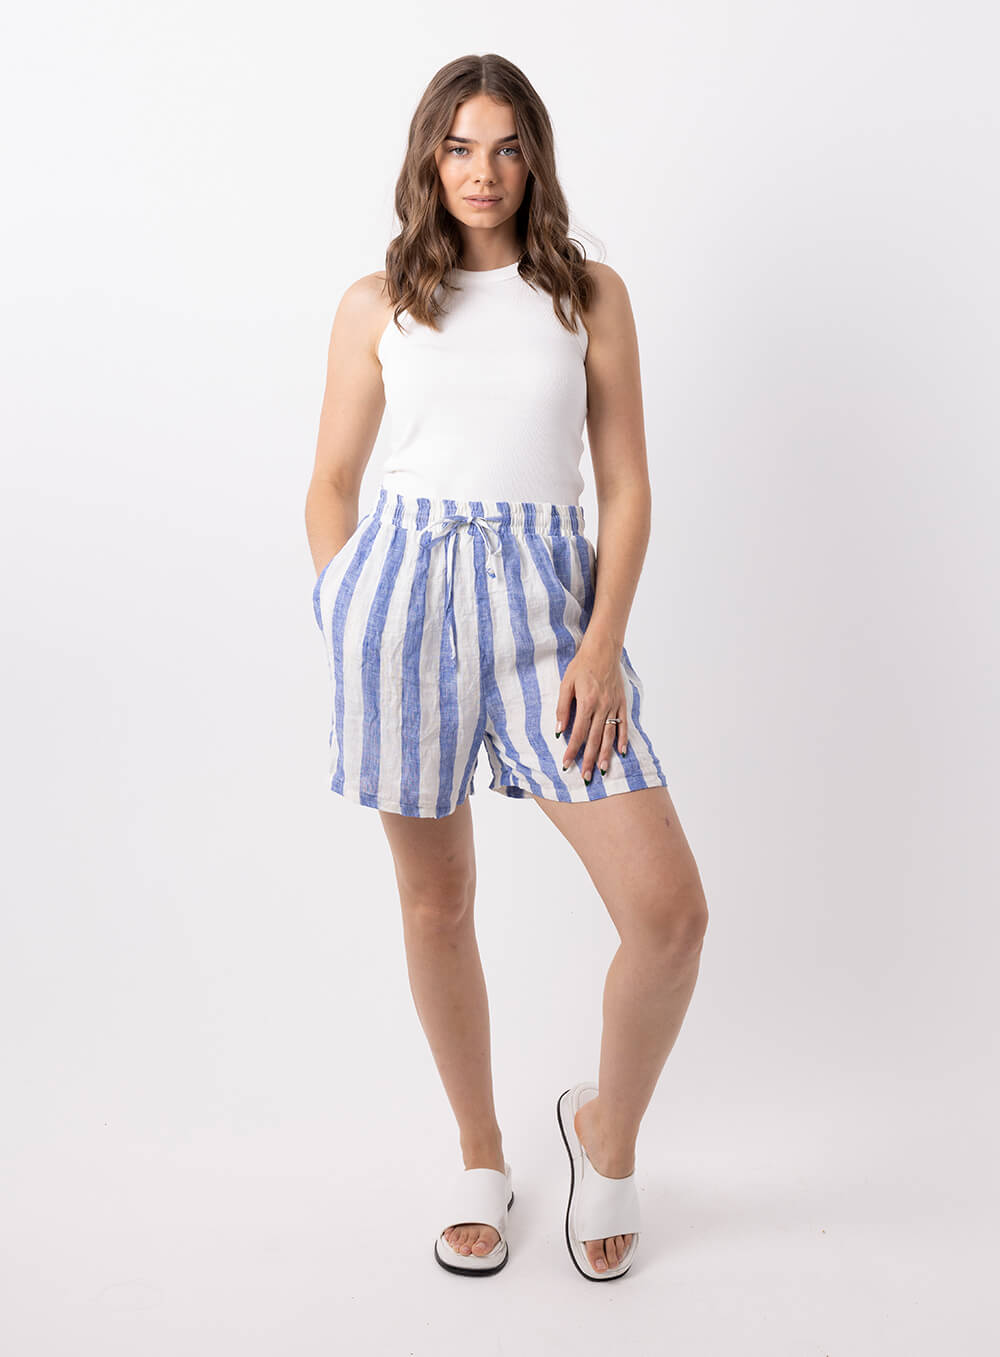 The Charlie stripe linen short in blue and white is made from 100% breathable linen, featuring wide elastic waistband with tie, finishes mid thigh with finished hem